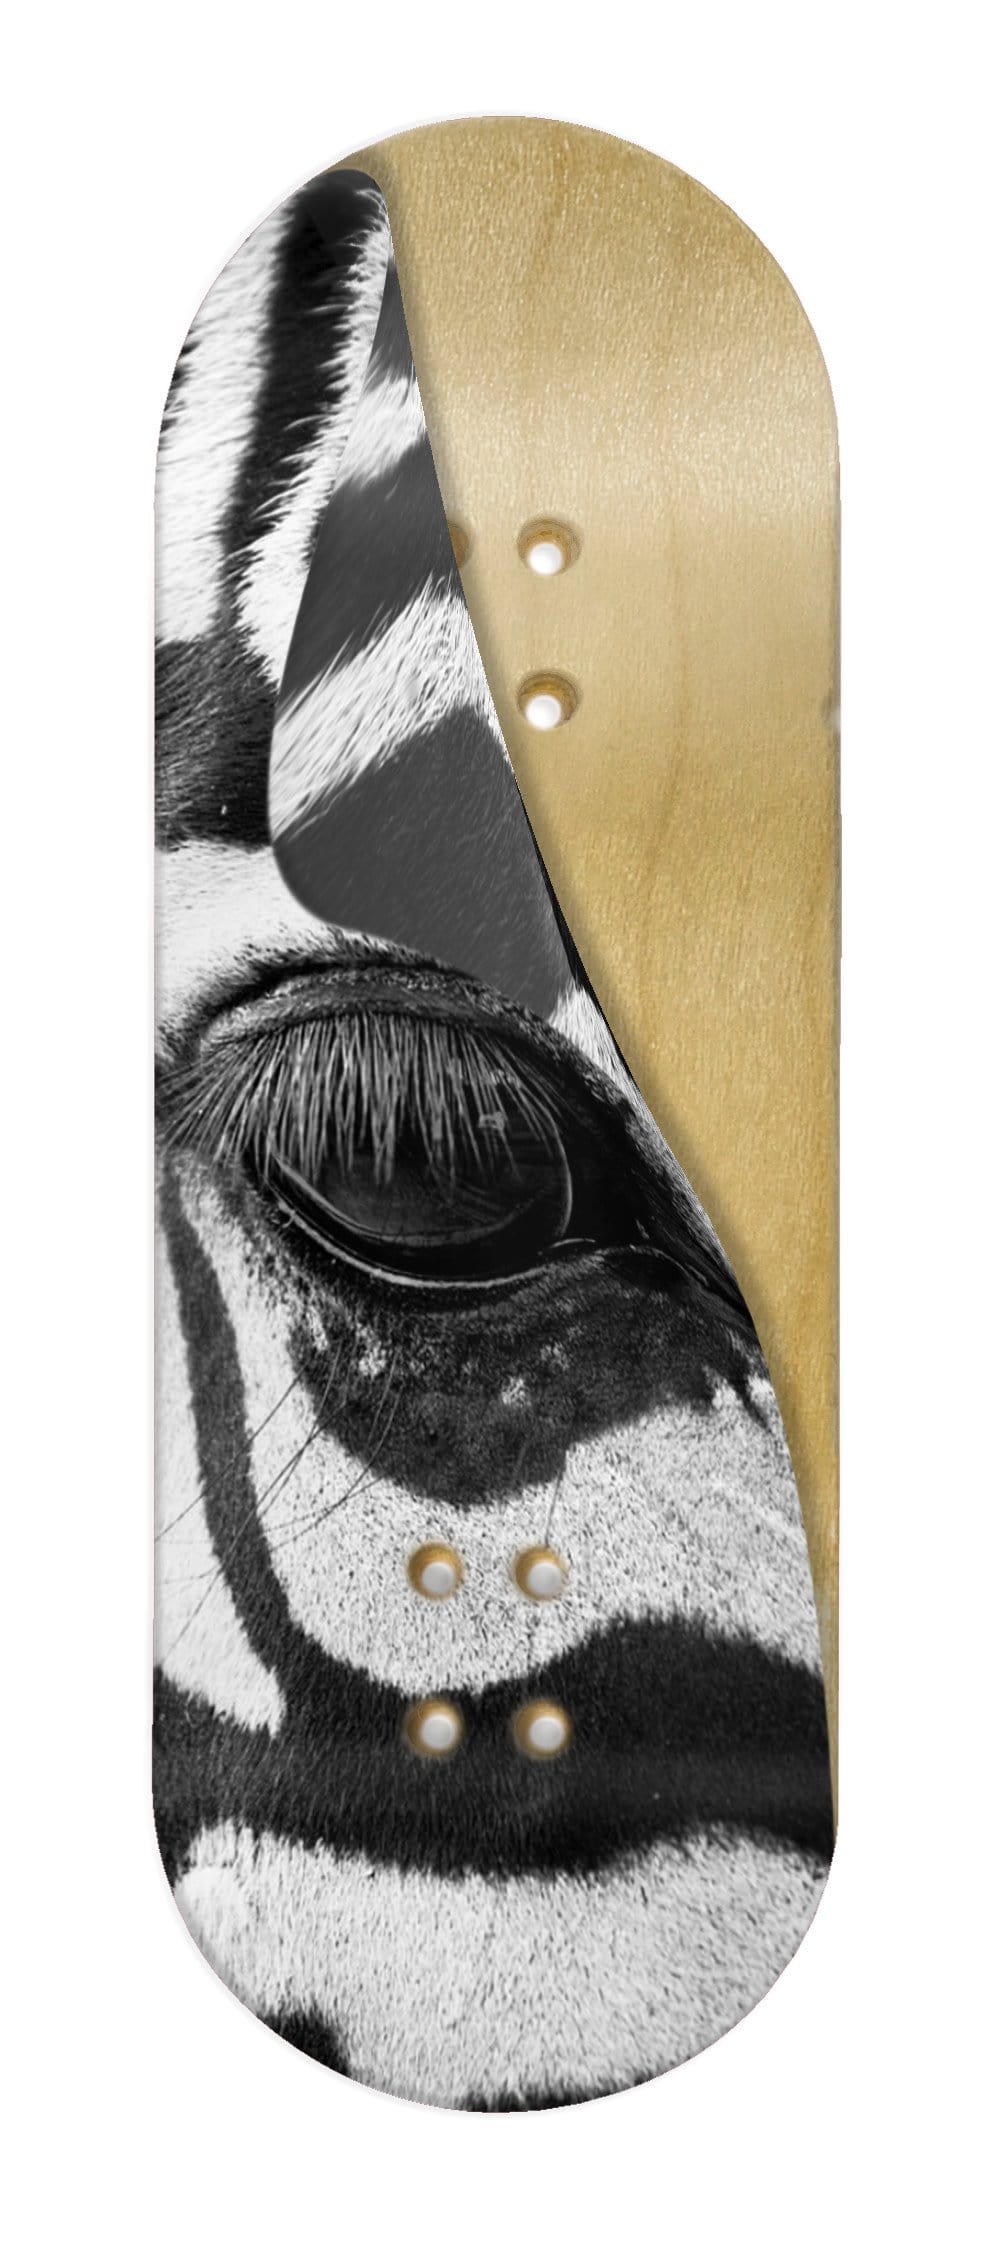 Teak Tuning Limited Edition "Striped Stare" Deck Graphic Wrap - 35mm x 110mm